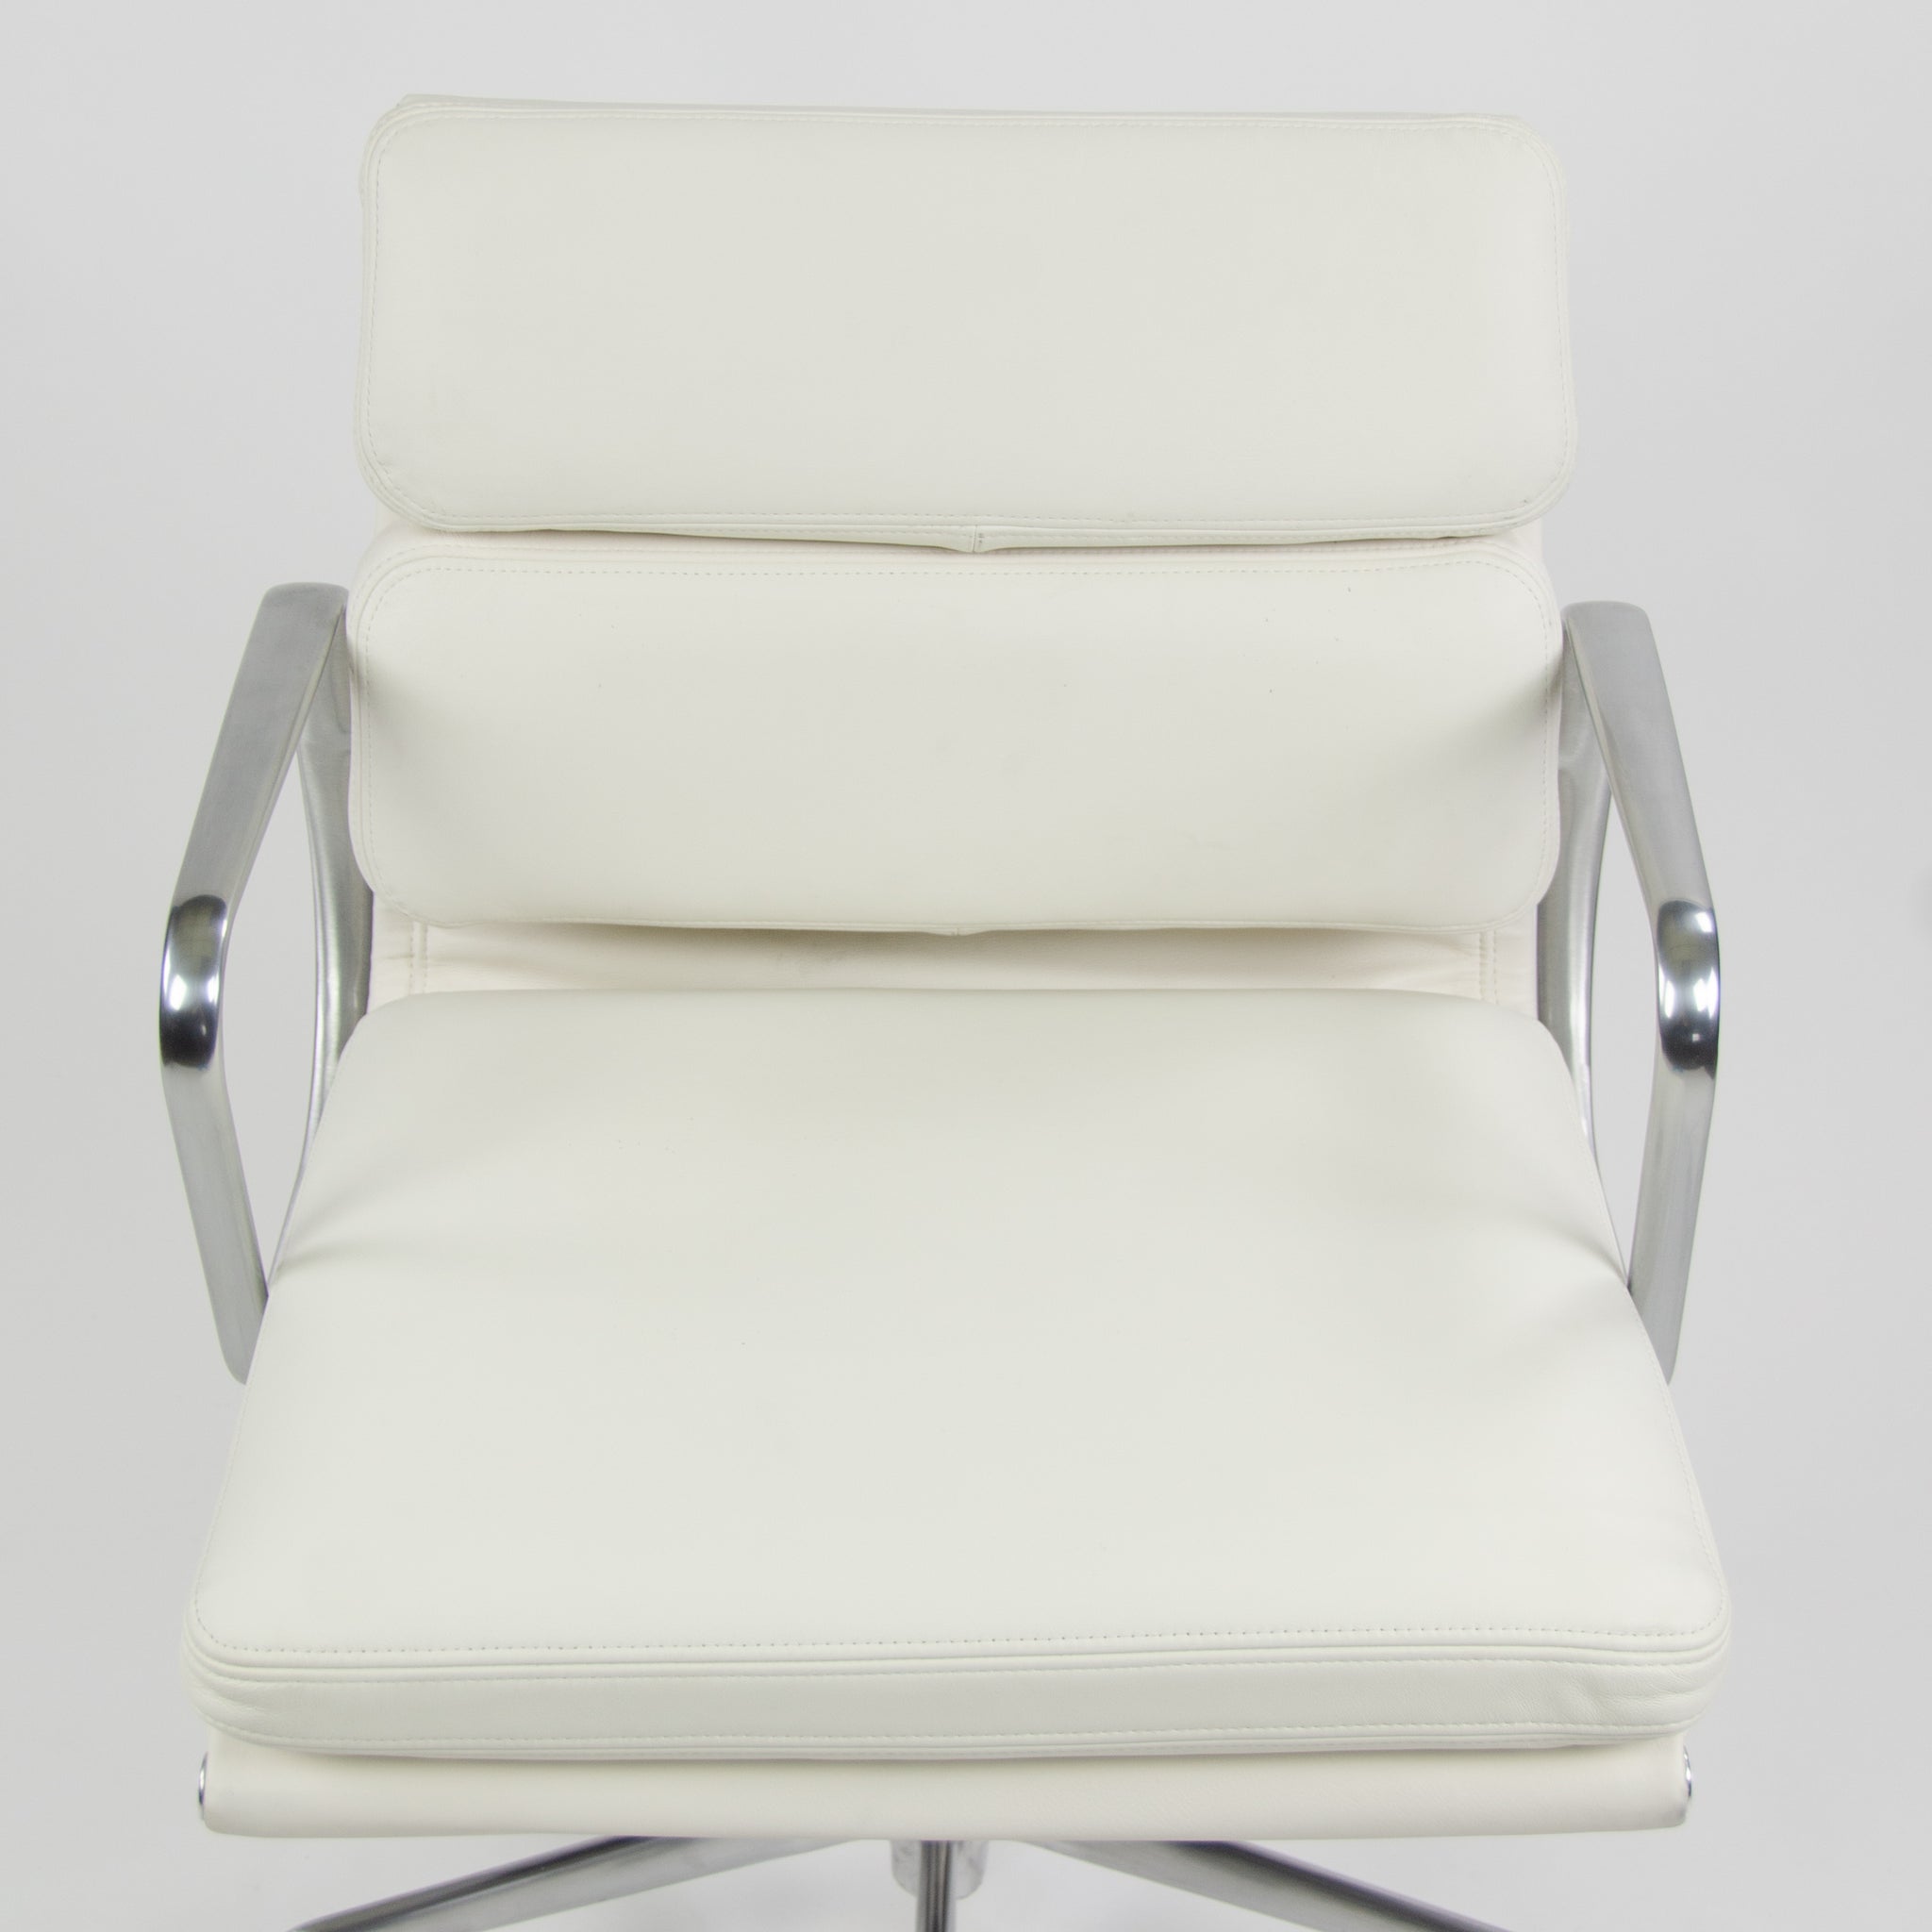 SOLD Eames Herman Miller Low Soft Pad Aluminum Desk Chair White Leather